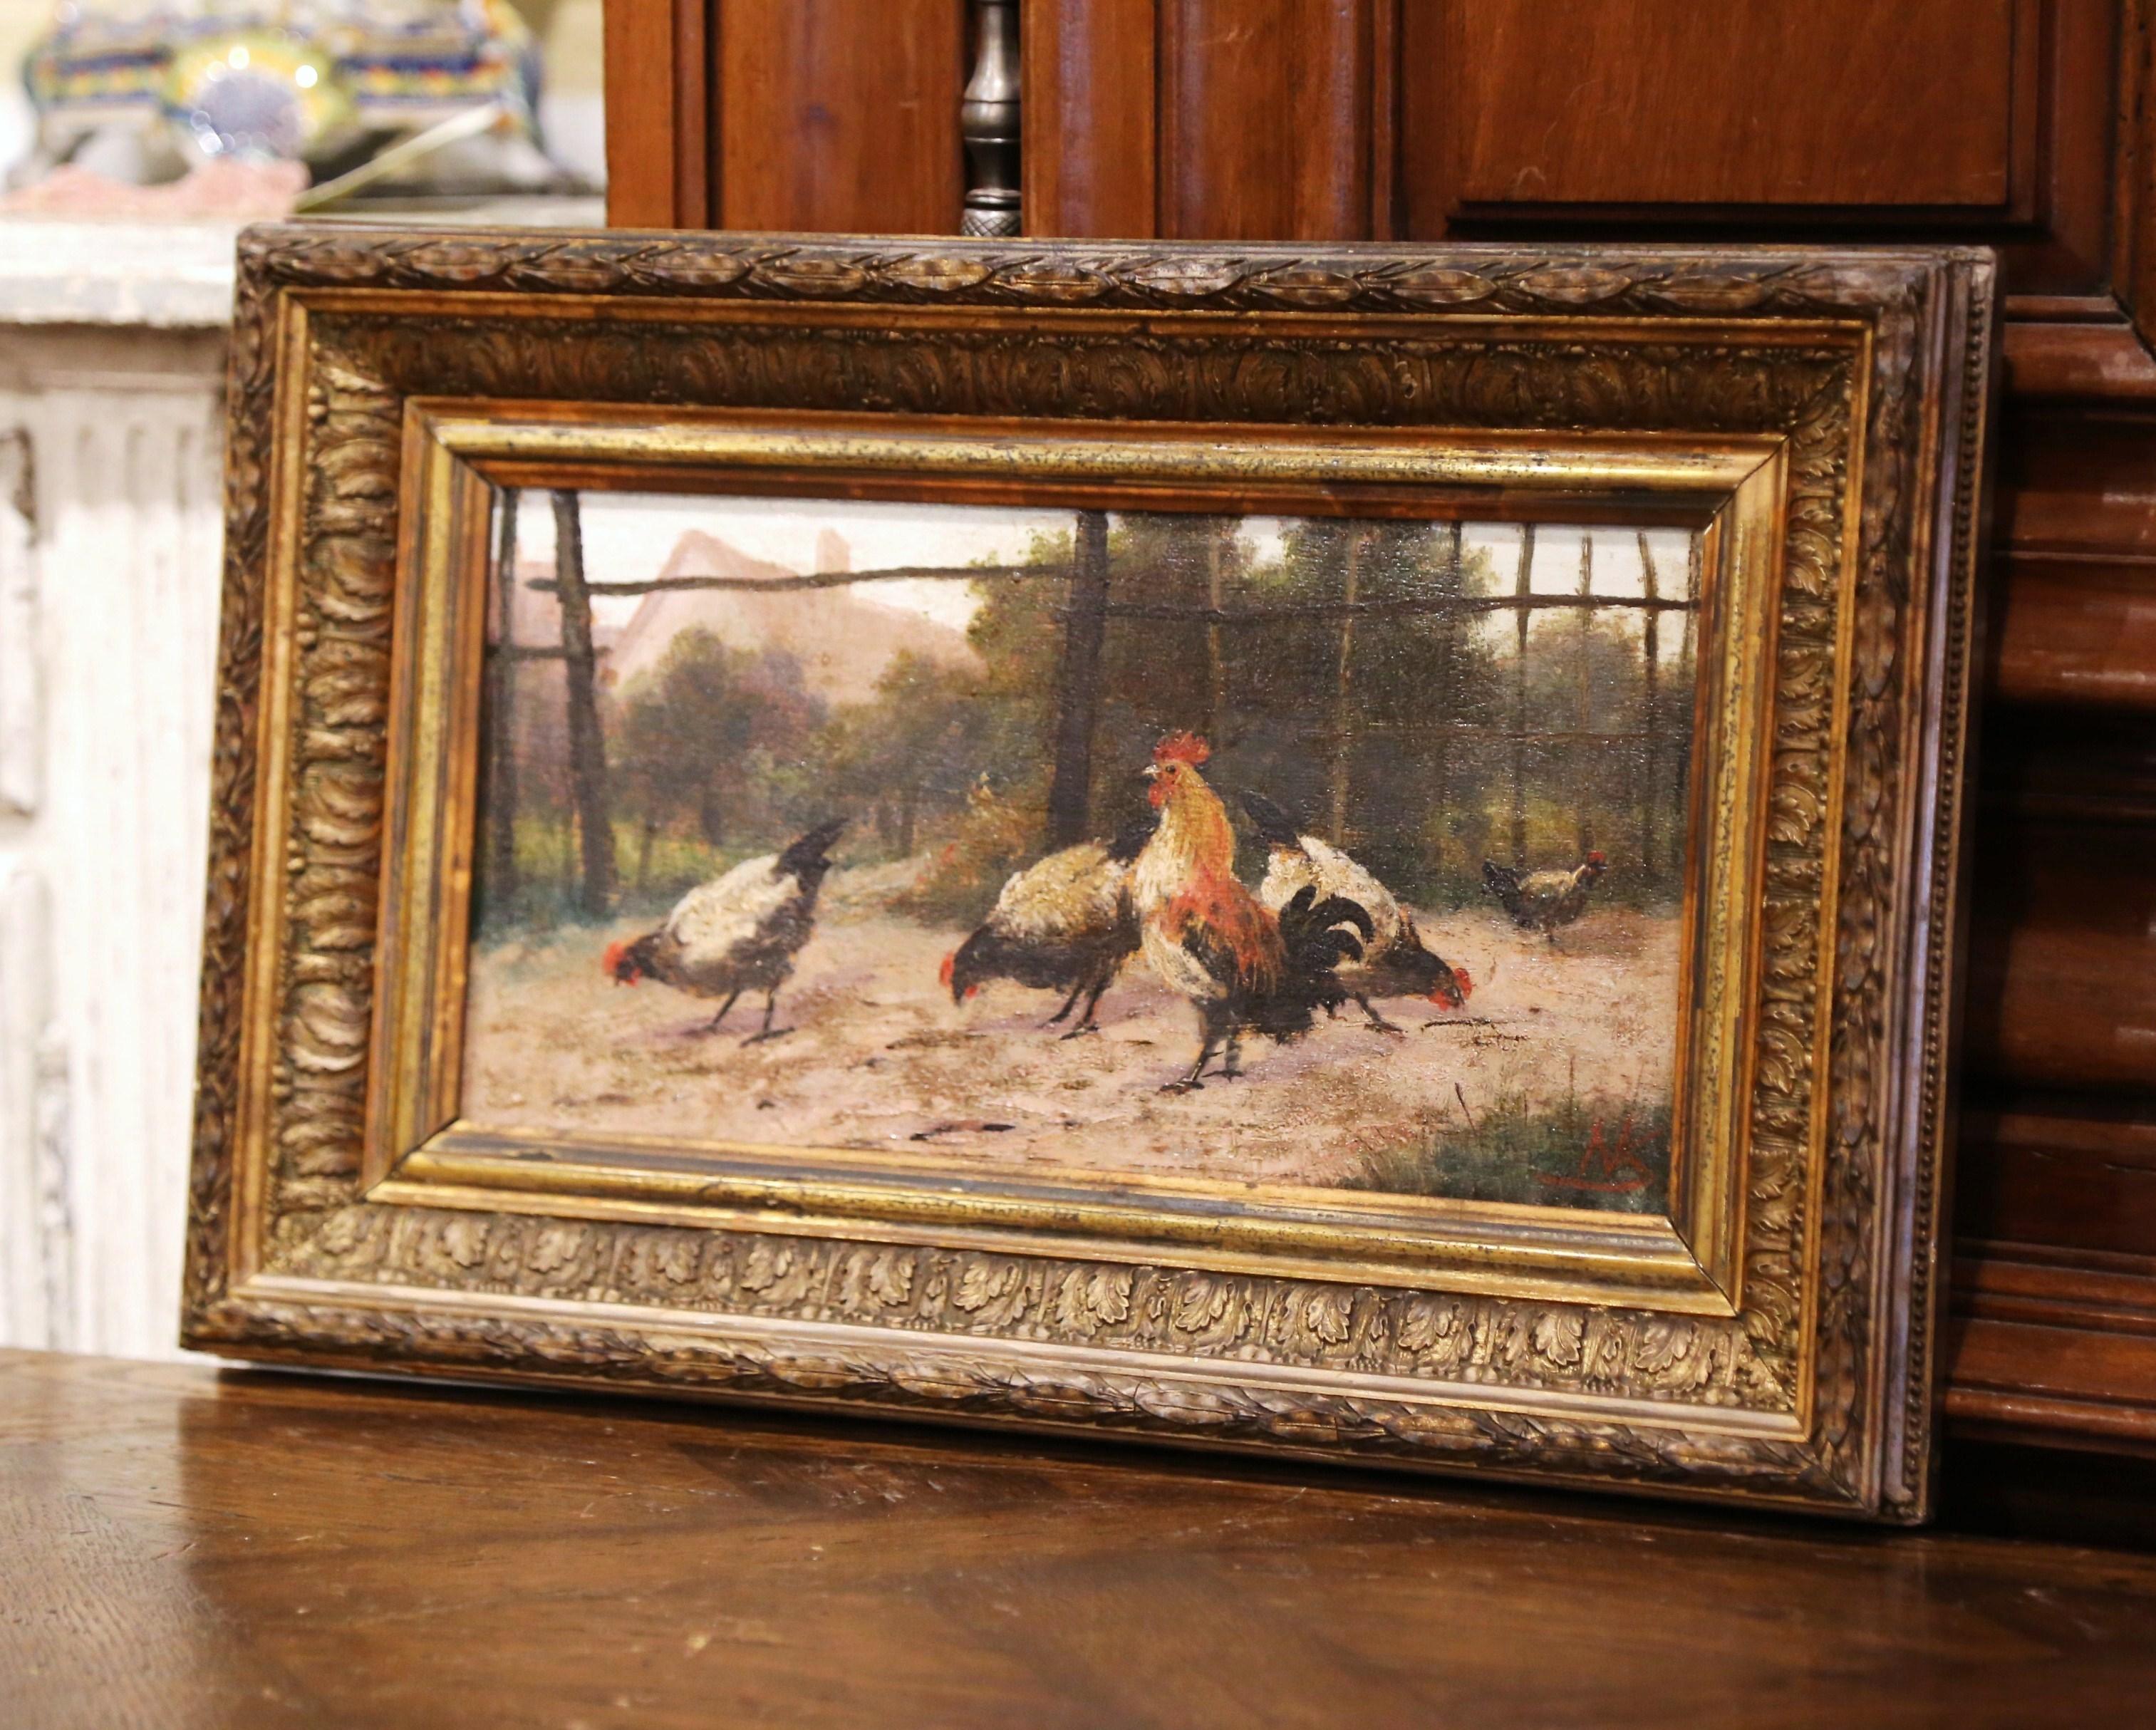 Created in Normandy France, circa 1870, and set in the original carved gilt frame, the antique artwork composition painted on board depicts a typical 